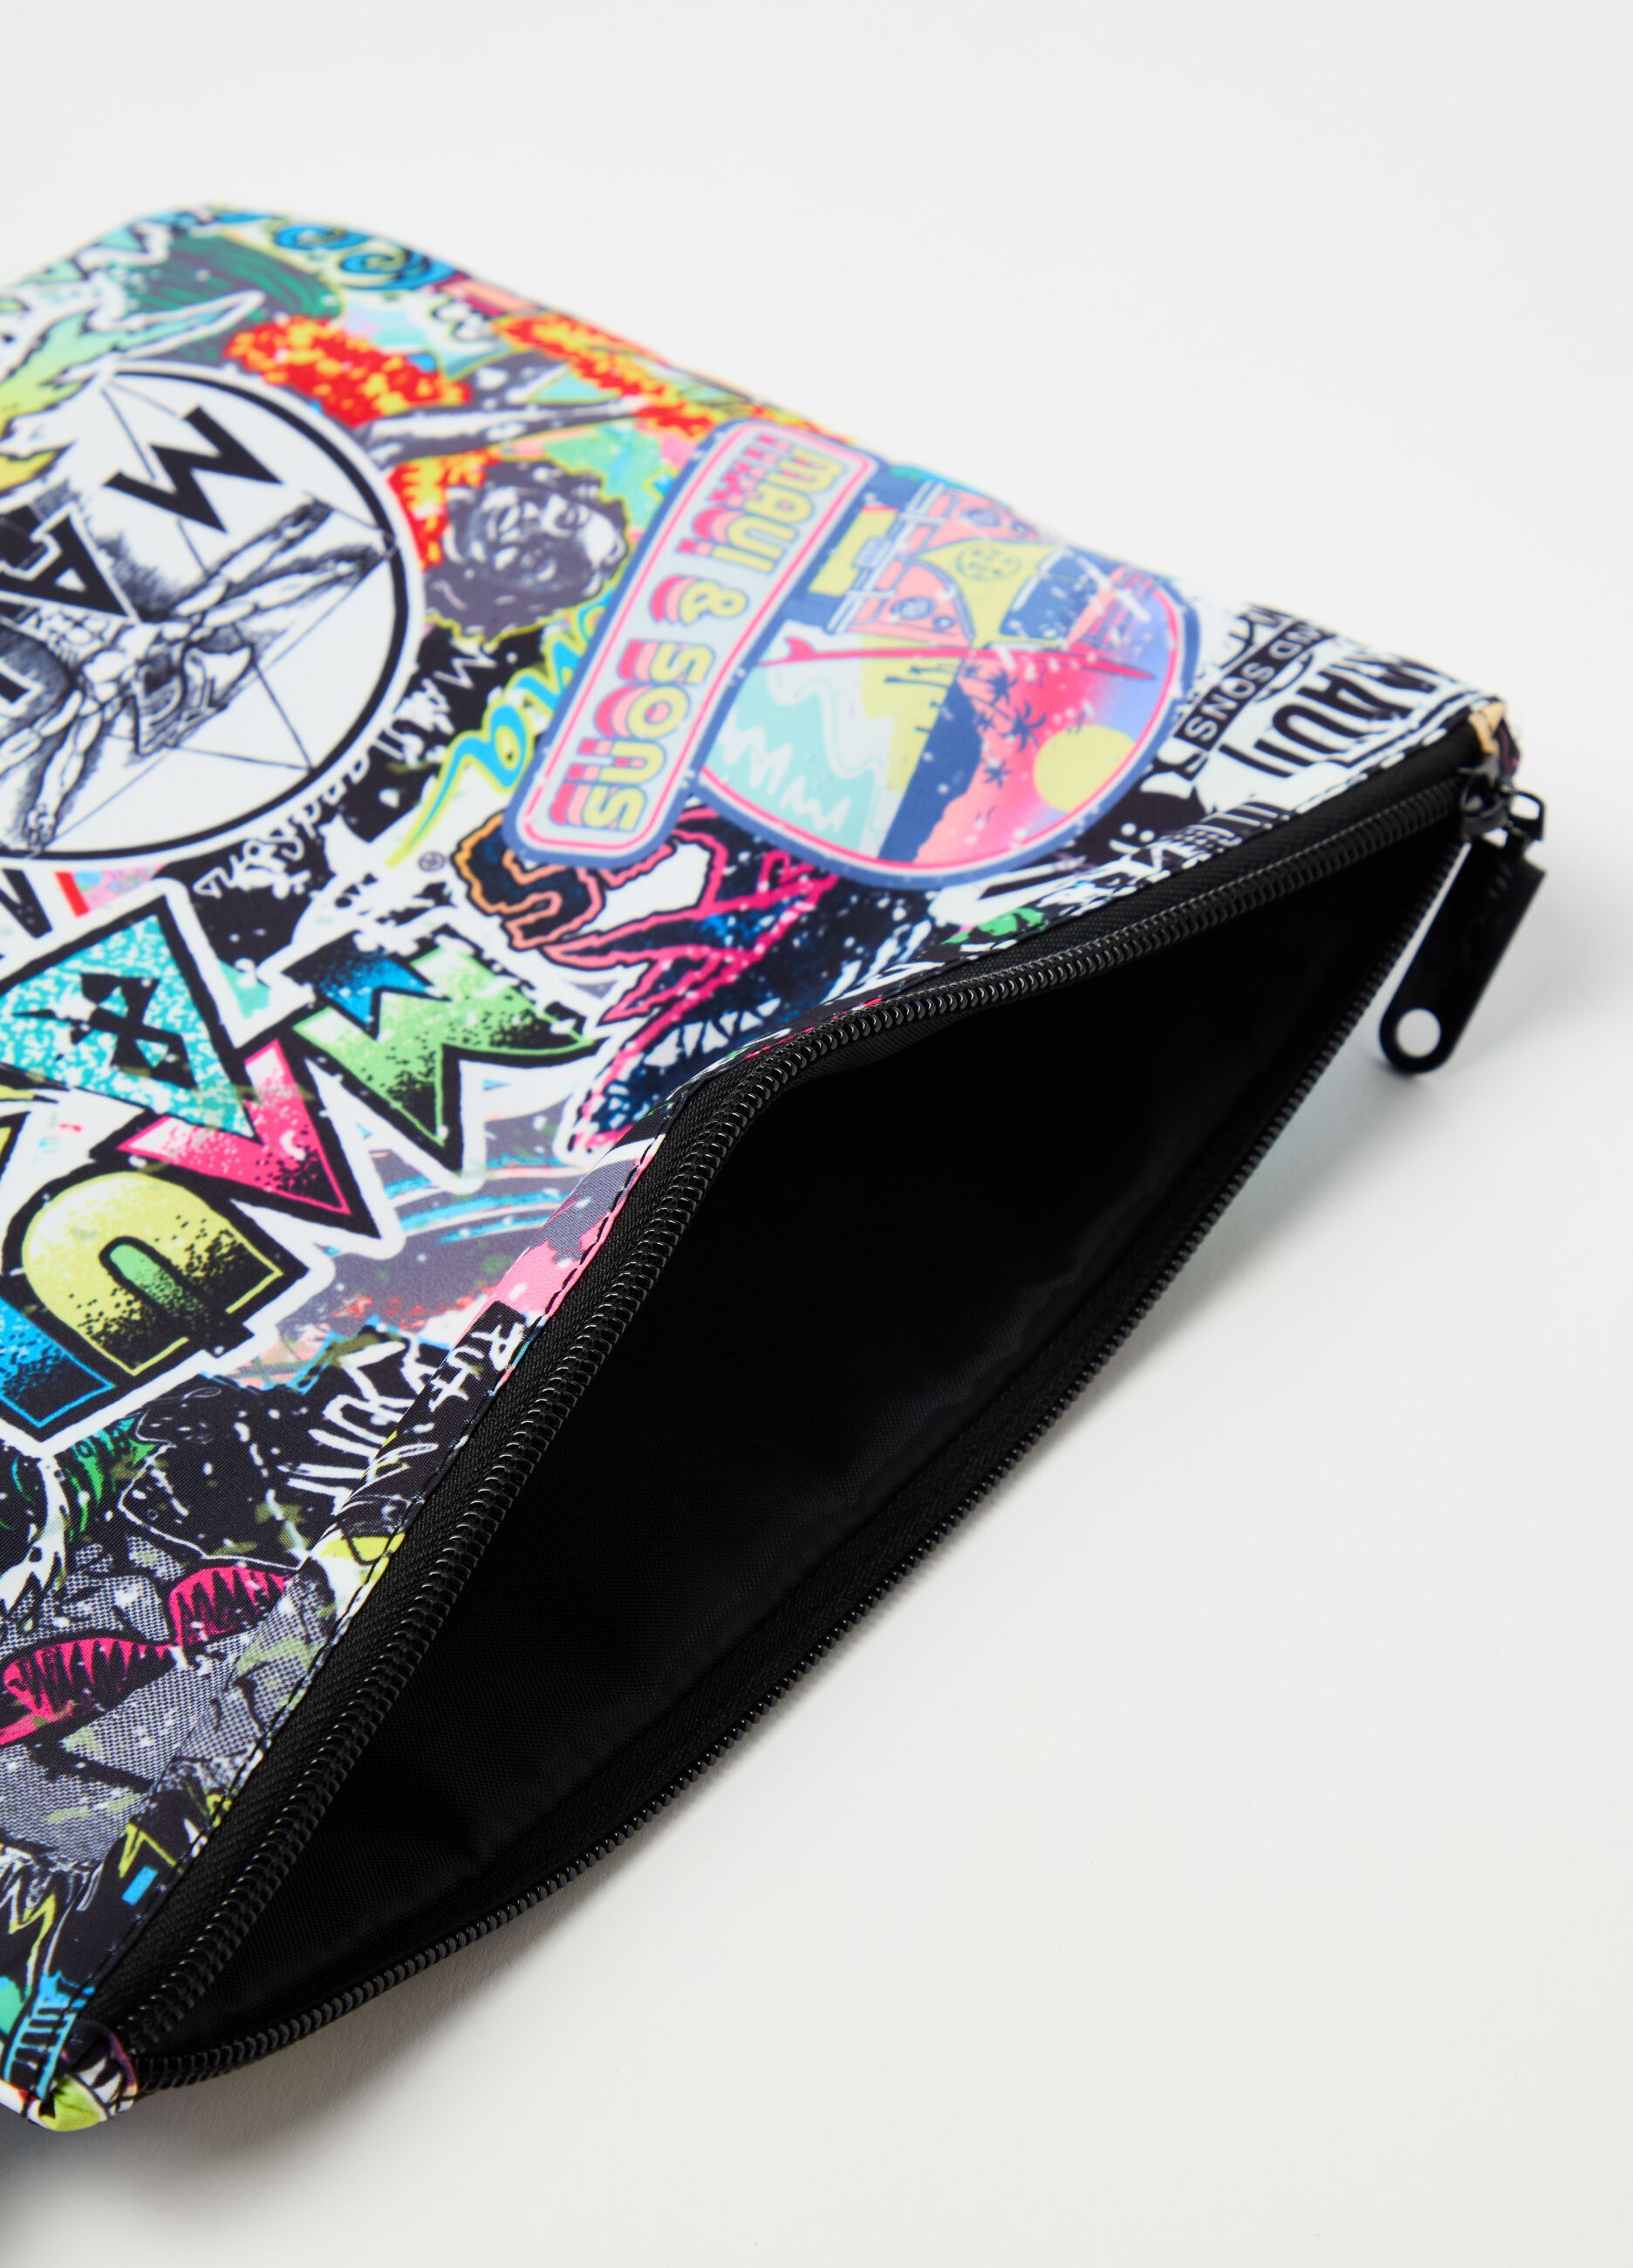 Clutch bag with graffiti-style print